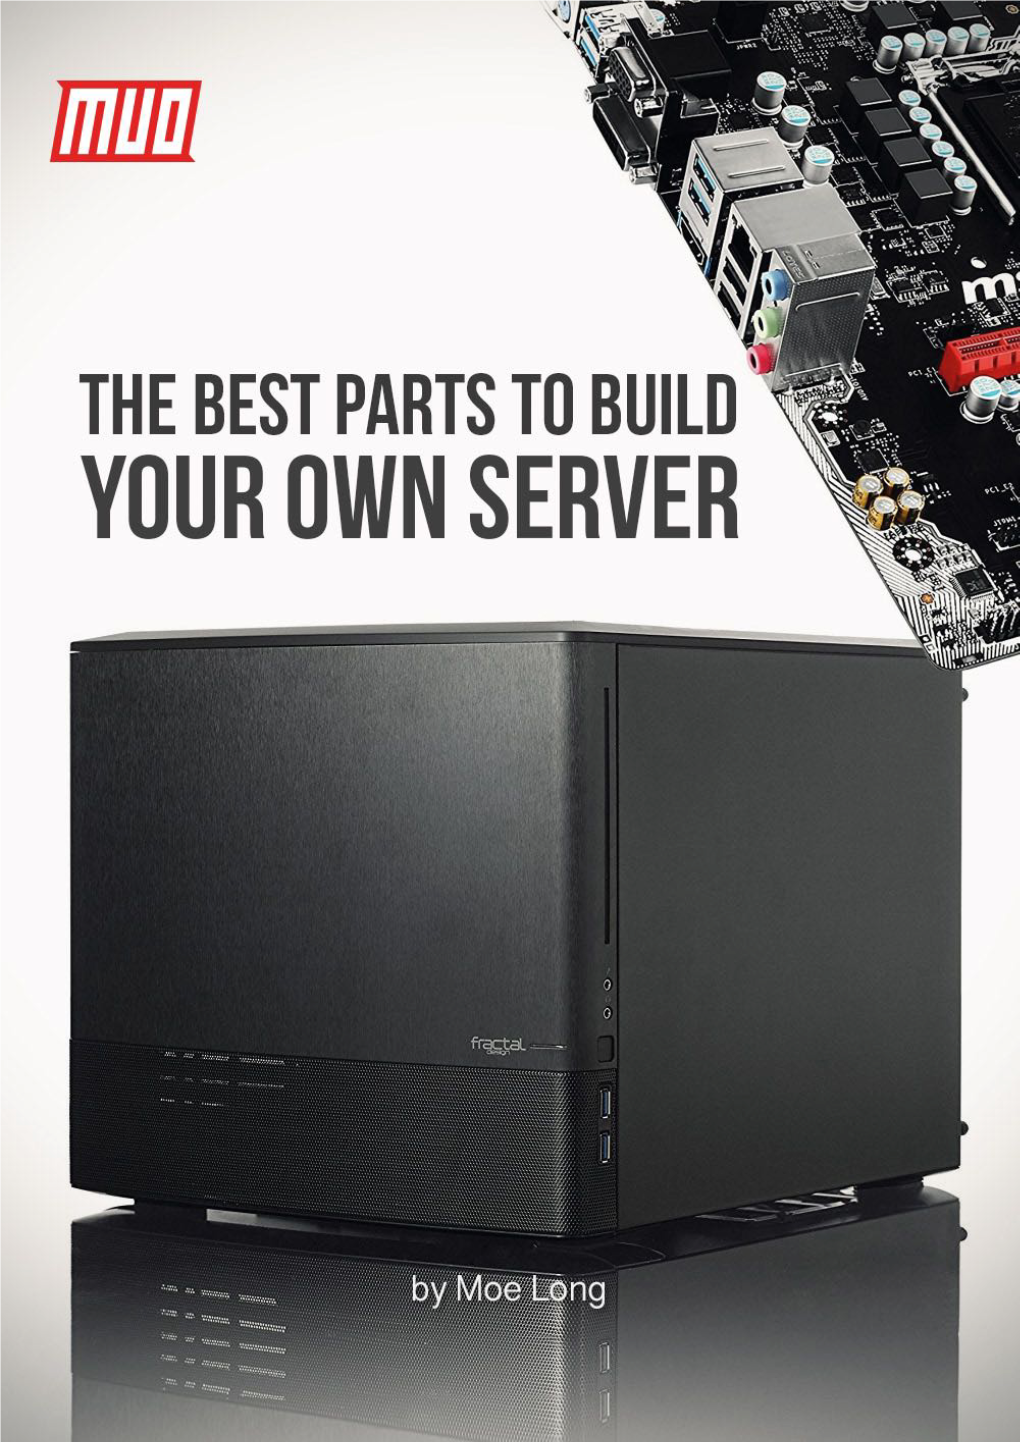 The Best Parts to Build Your Own Server Written by Moe Long